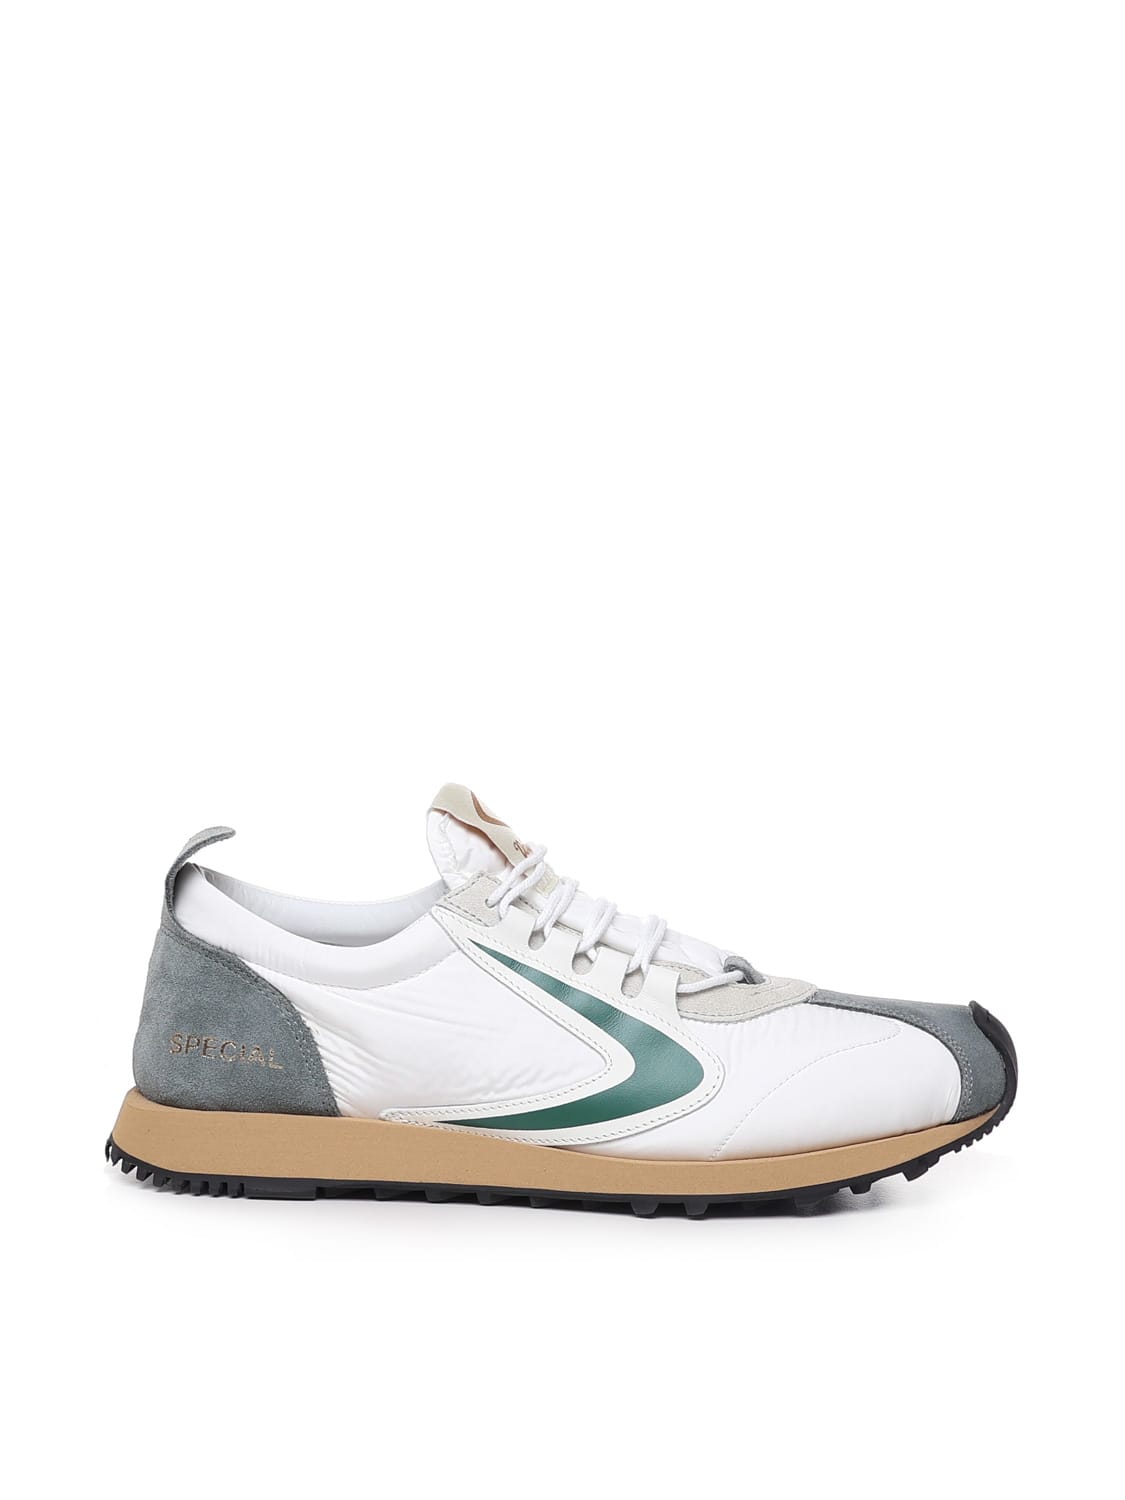 Valsport Special Nylon 03 Sneakers In White, Grey, Green